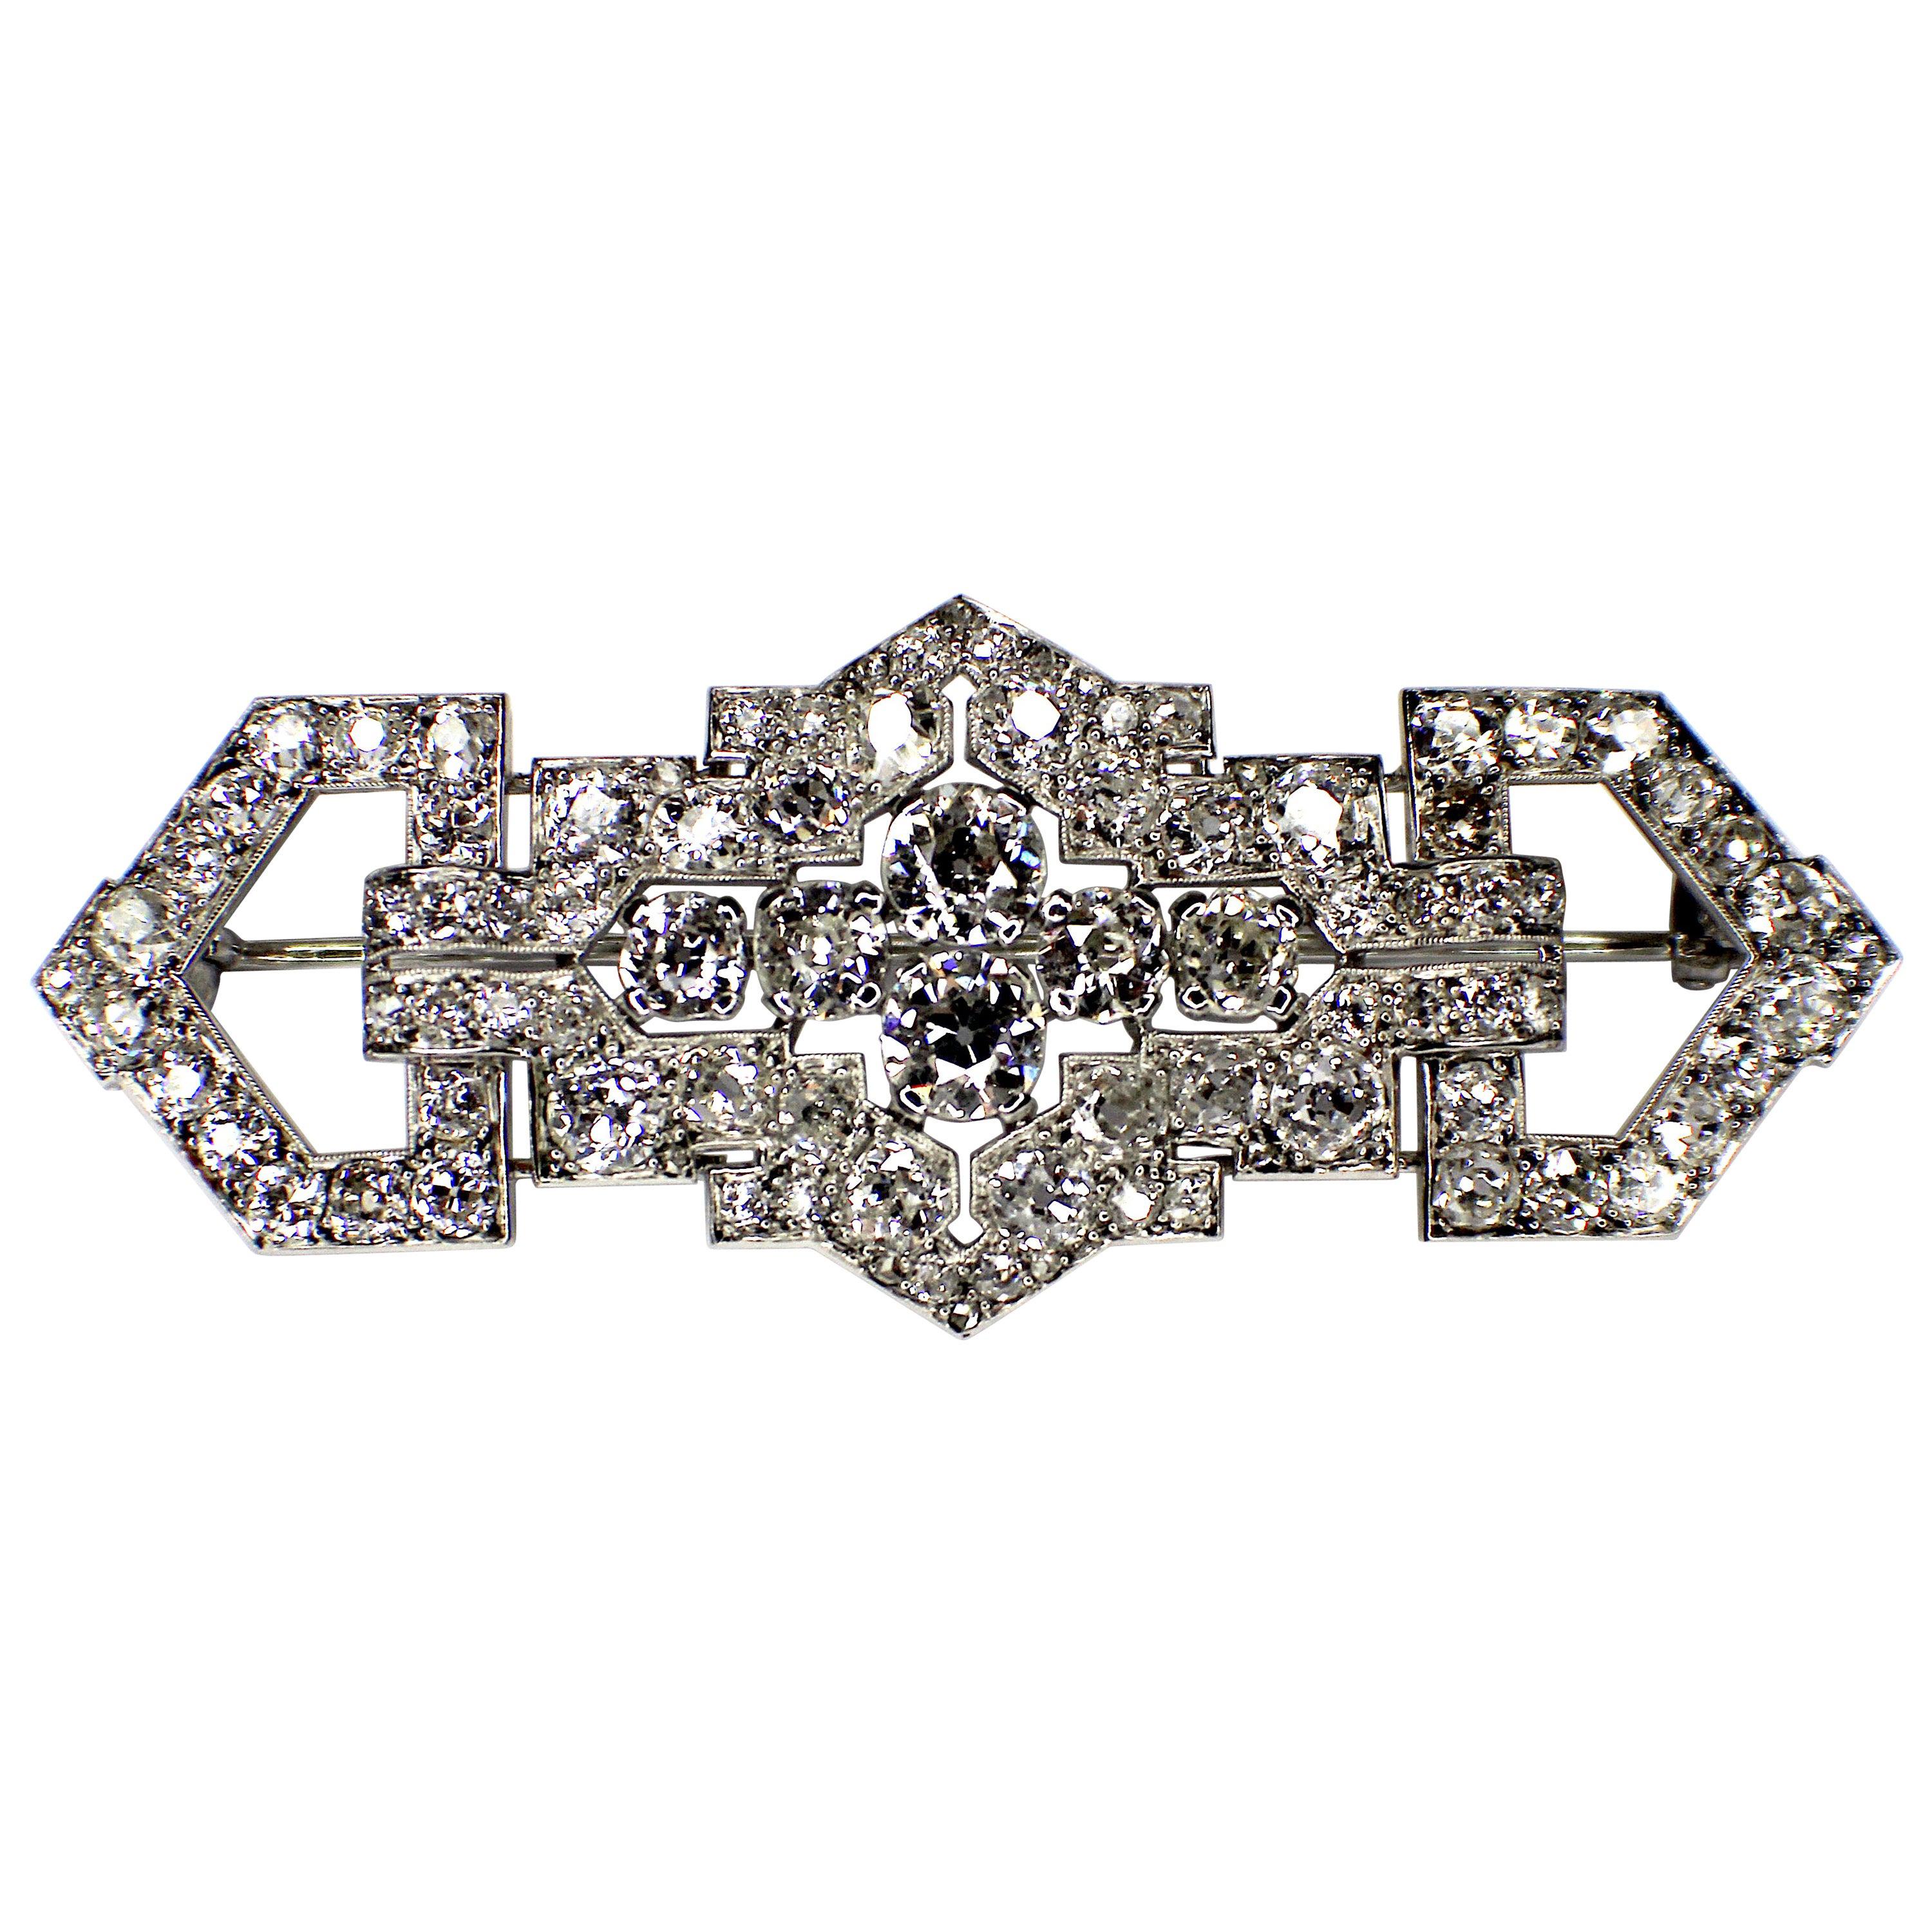 Gemolithos, Art Deco Diamond Brooch, French, by Cartier. Circa 1928 For Sale